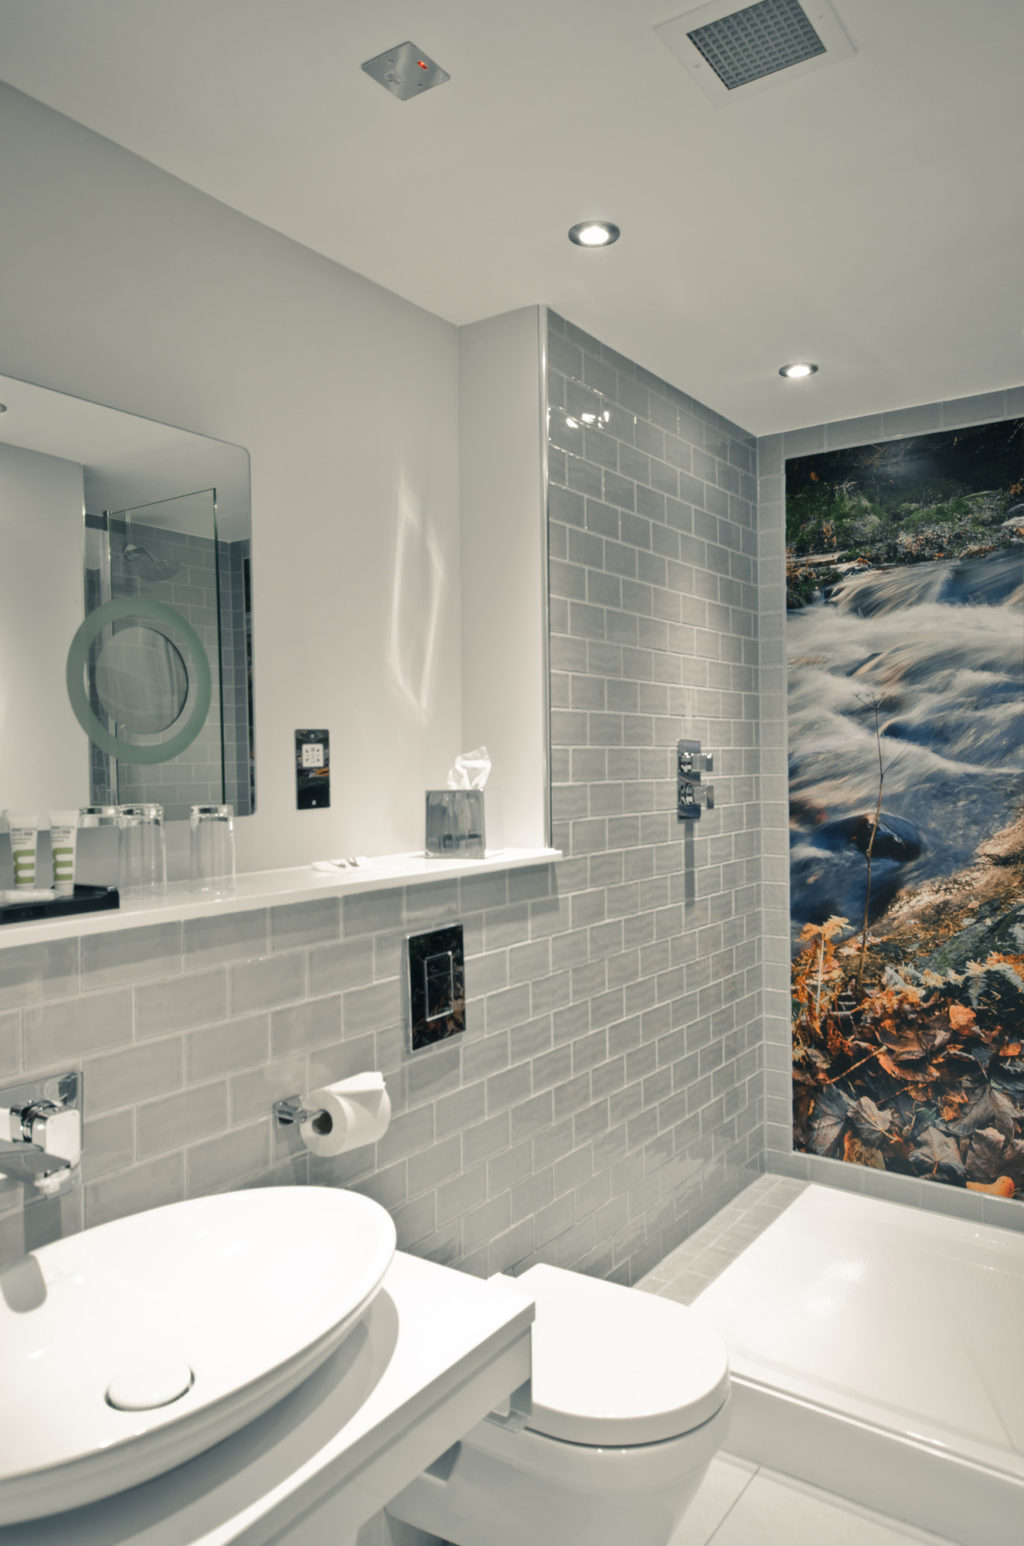 Superior room wet room shower with photographic mural on wall of nature scene and grey tiles Mercure Edinburgh City Princes Street Hotel Edinburgh 01313 421013